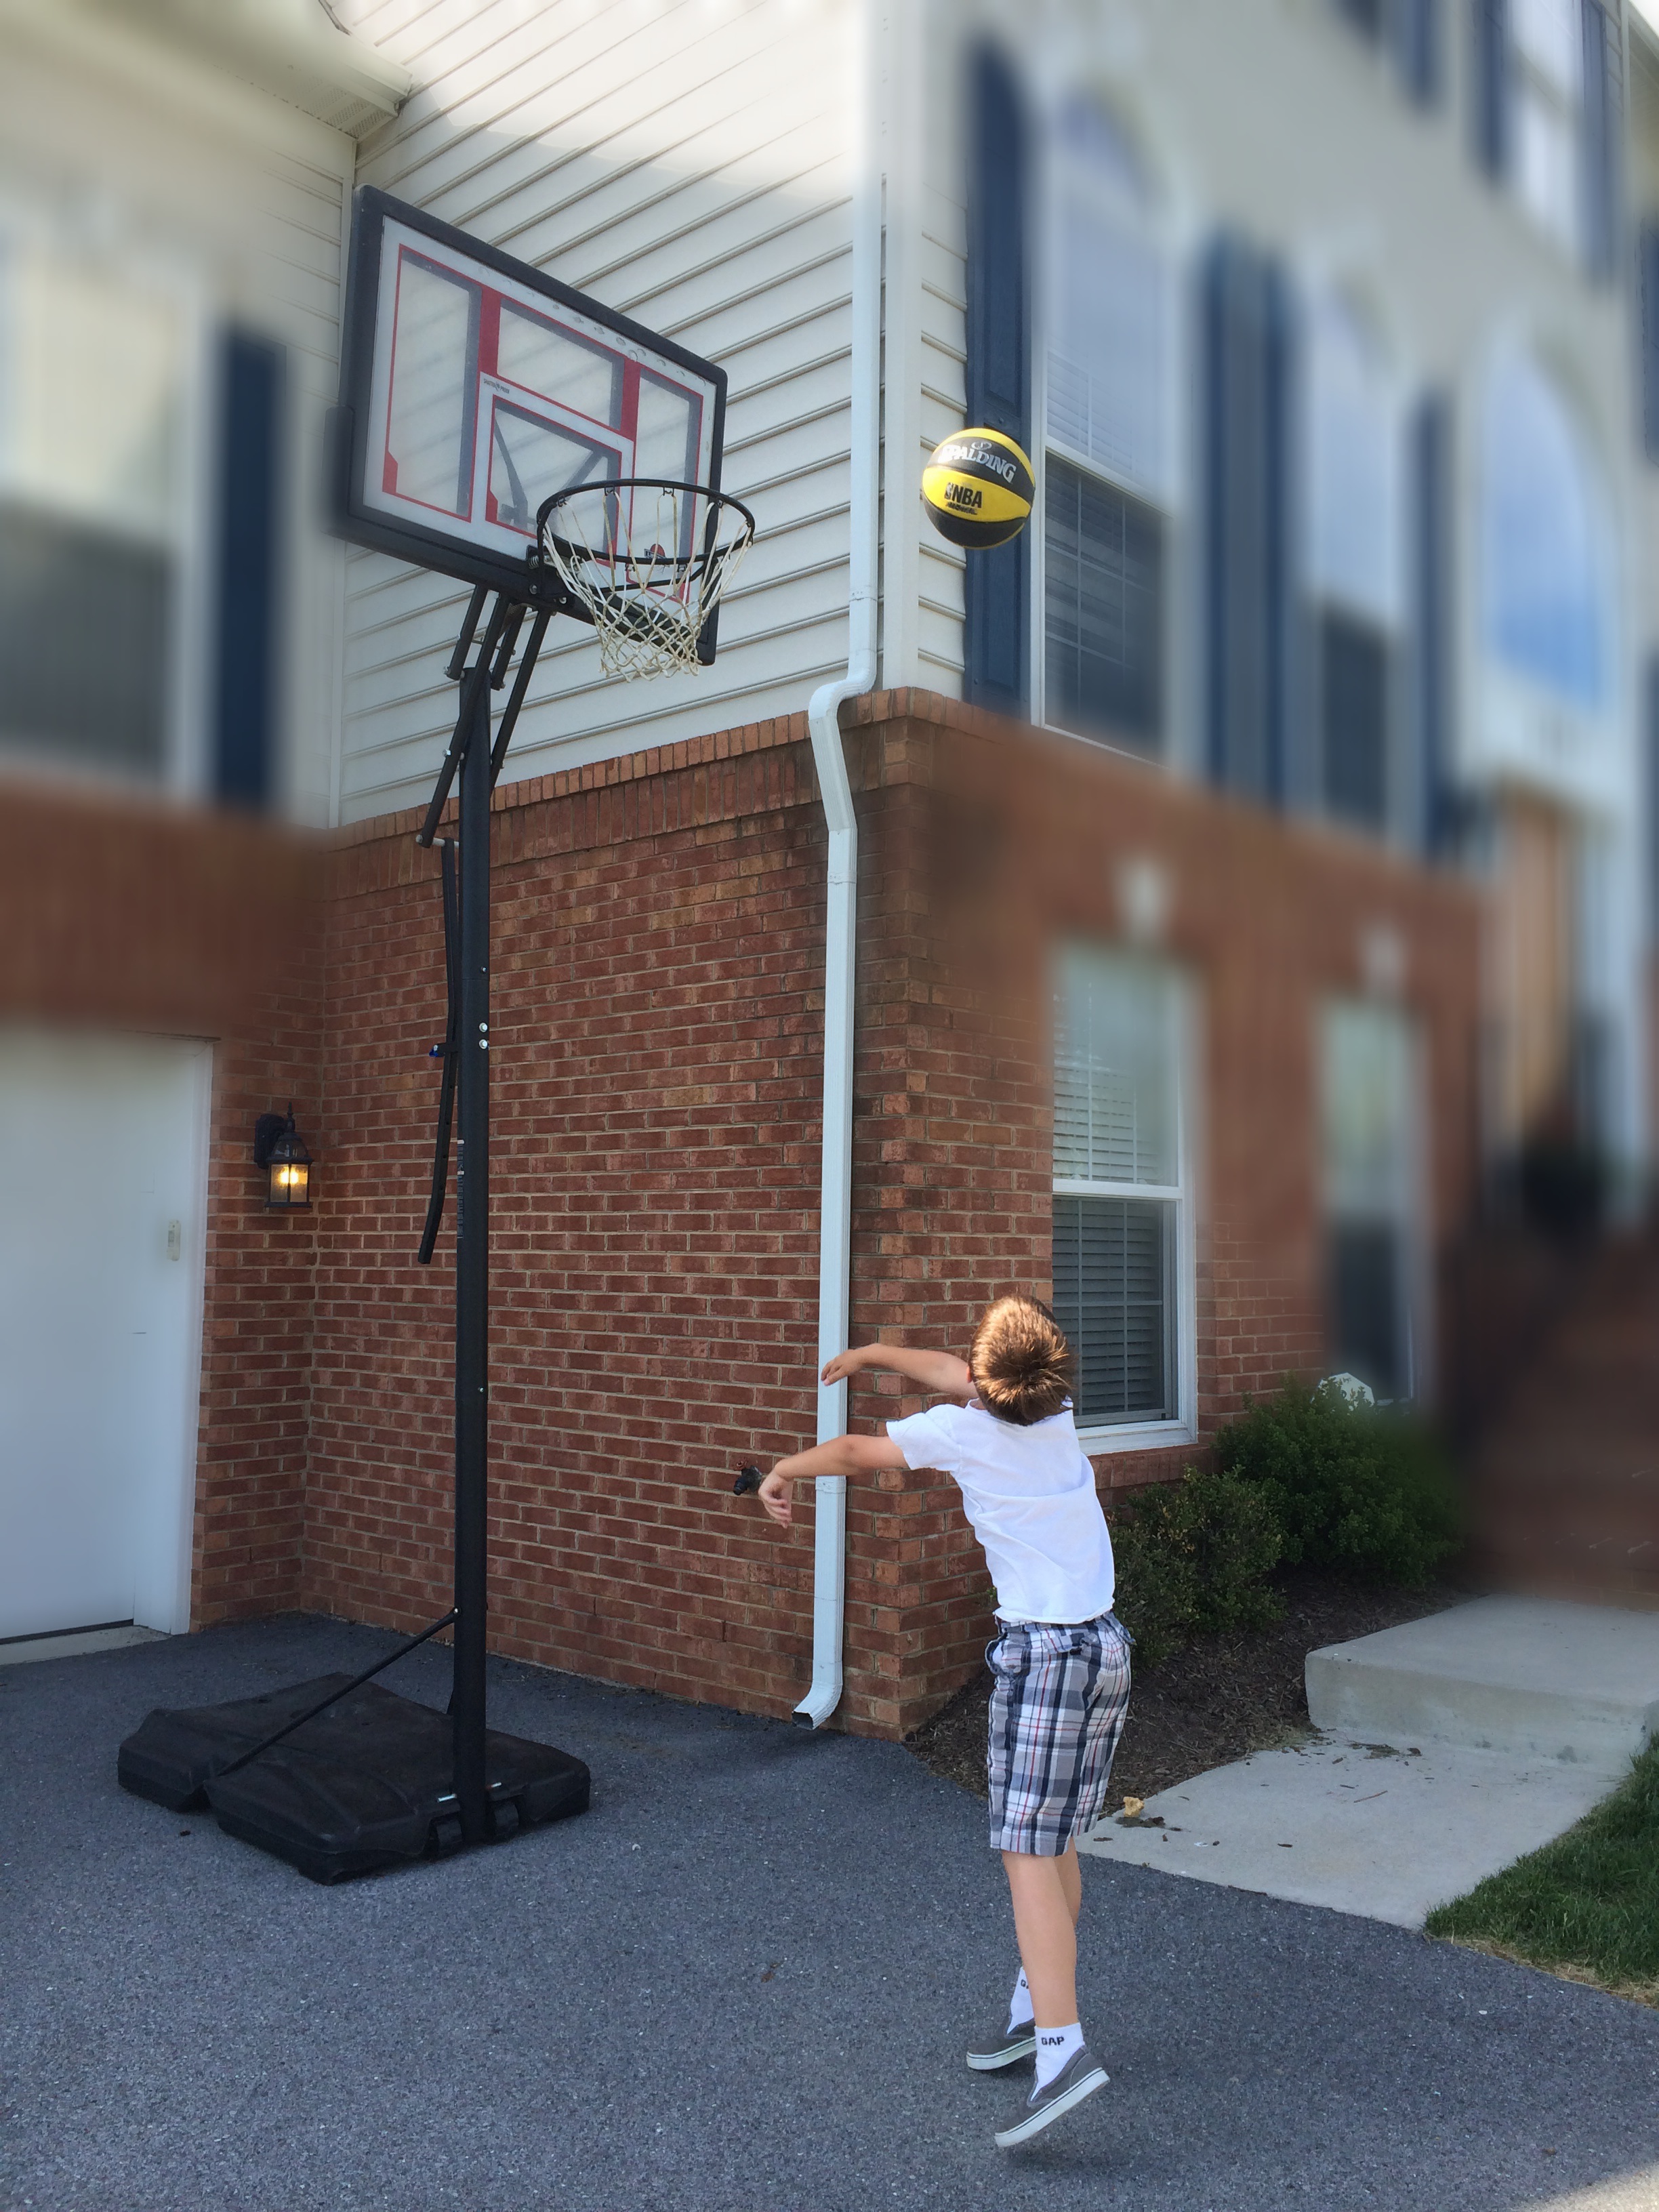 Should we lower the hoop for kids?